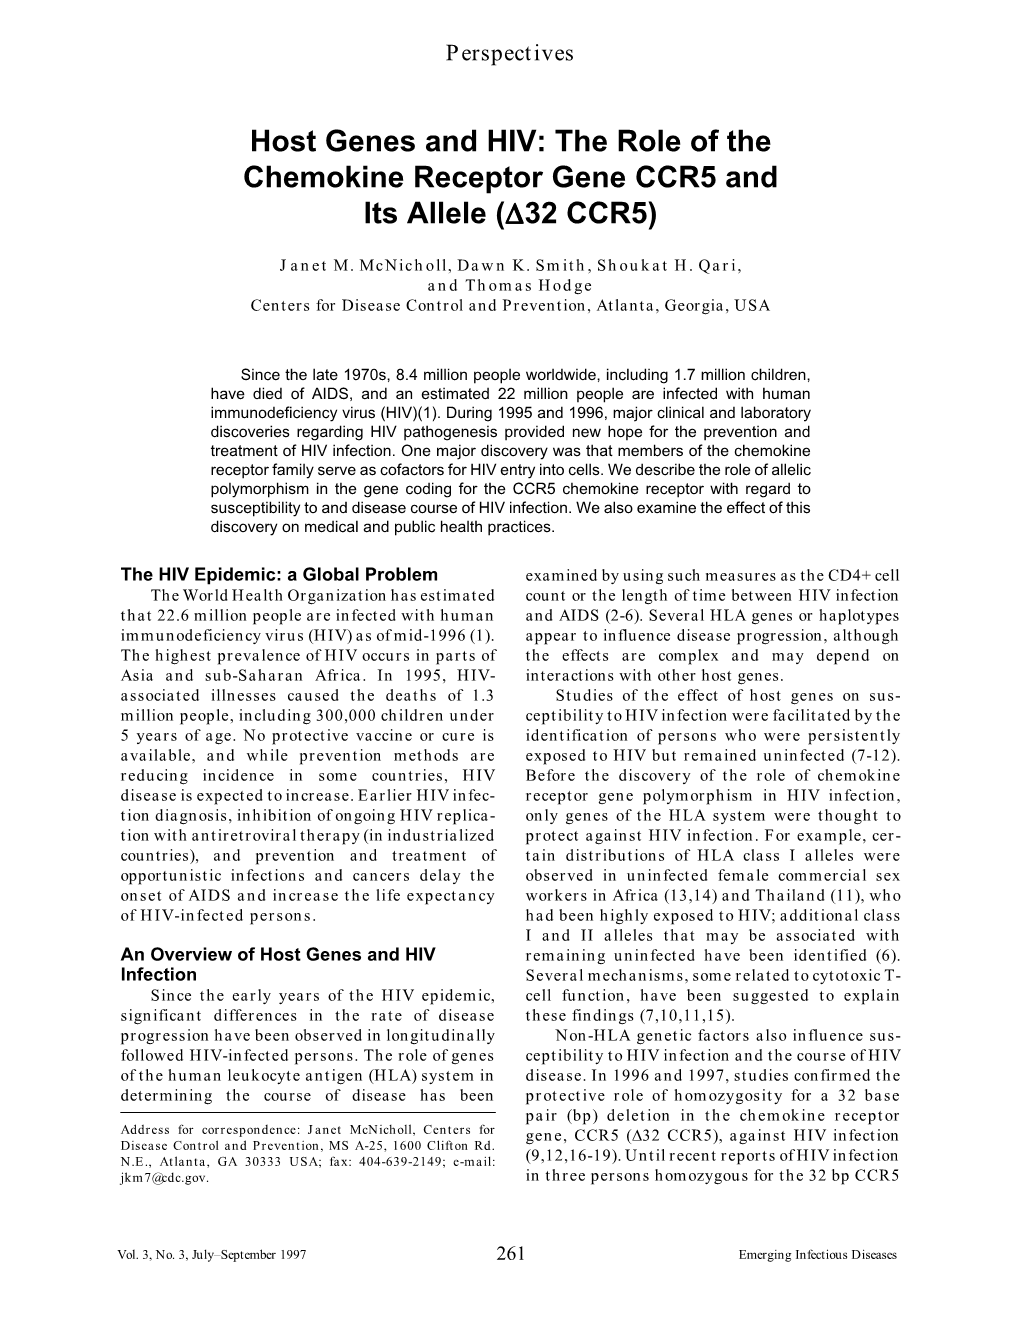 The Role of the Chemokine Receptor Gene CCR5 and Its Allele (∆32 CCR5)